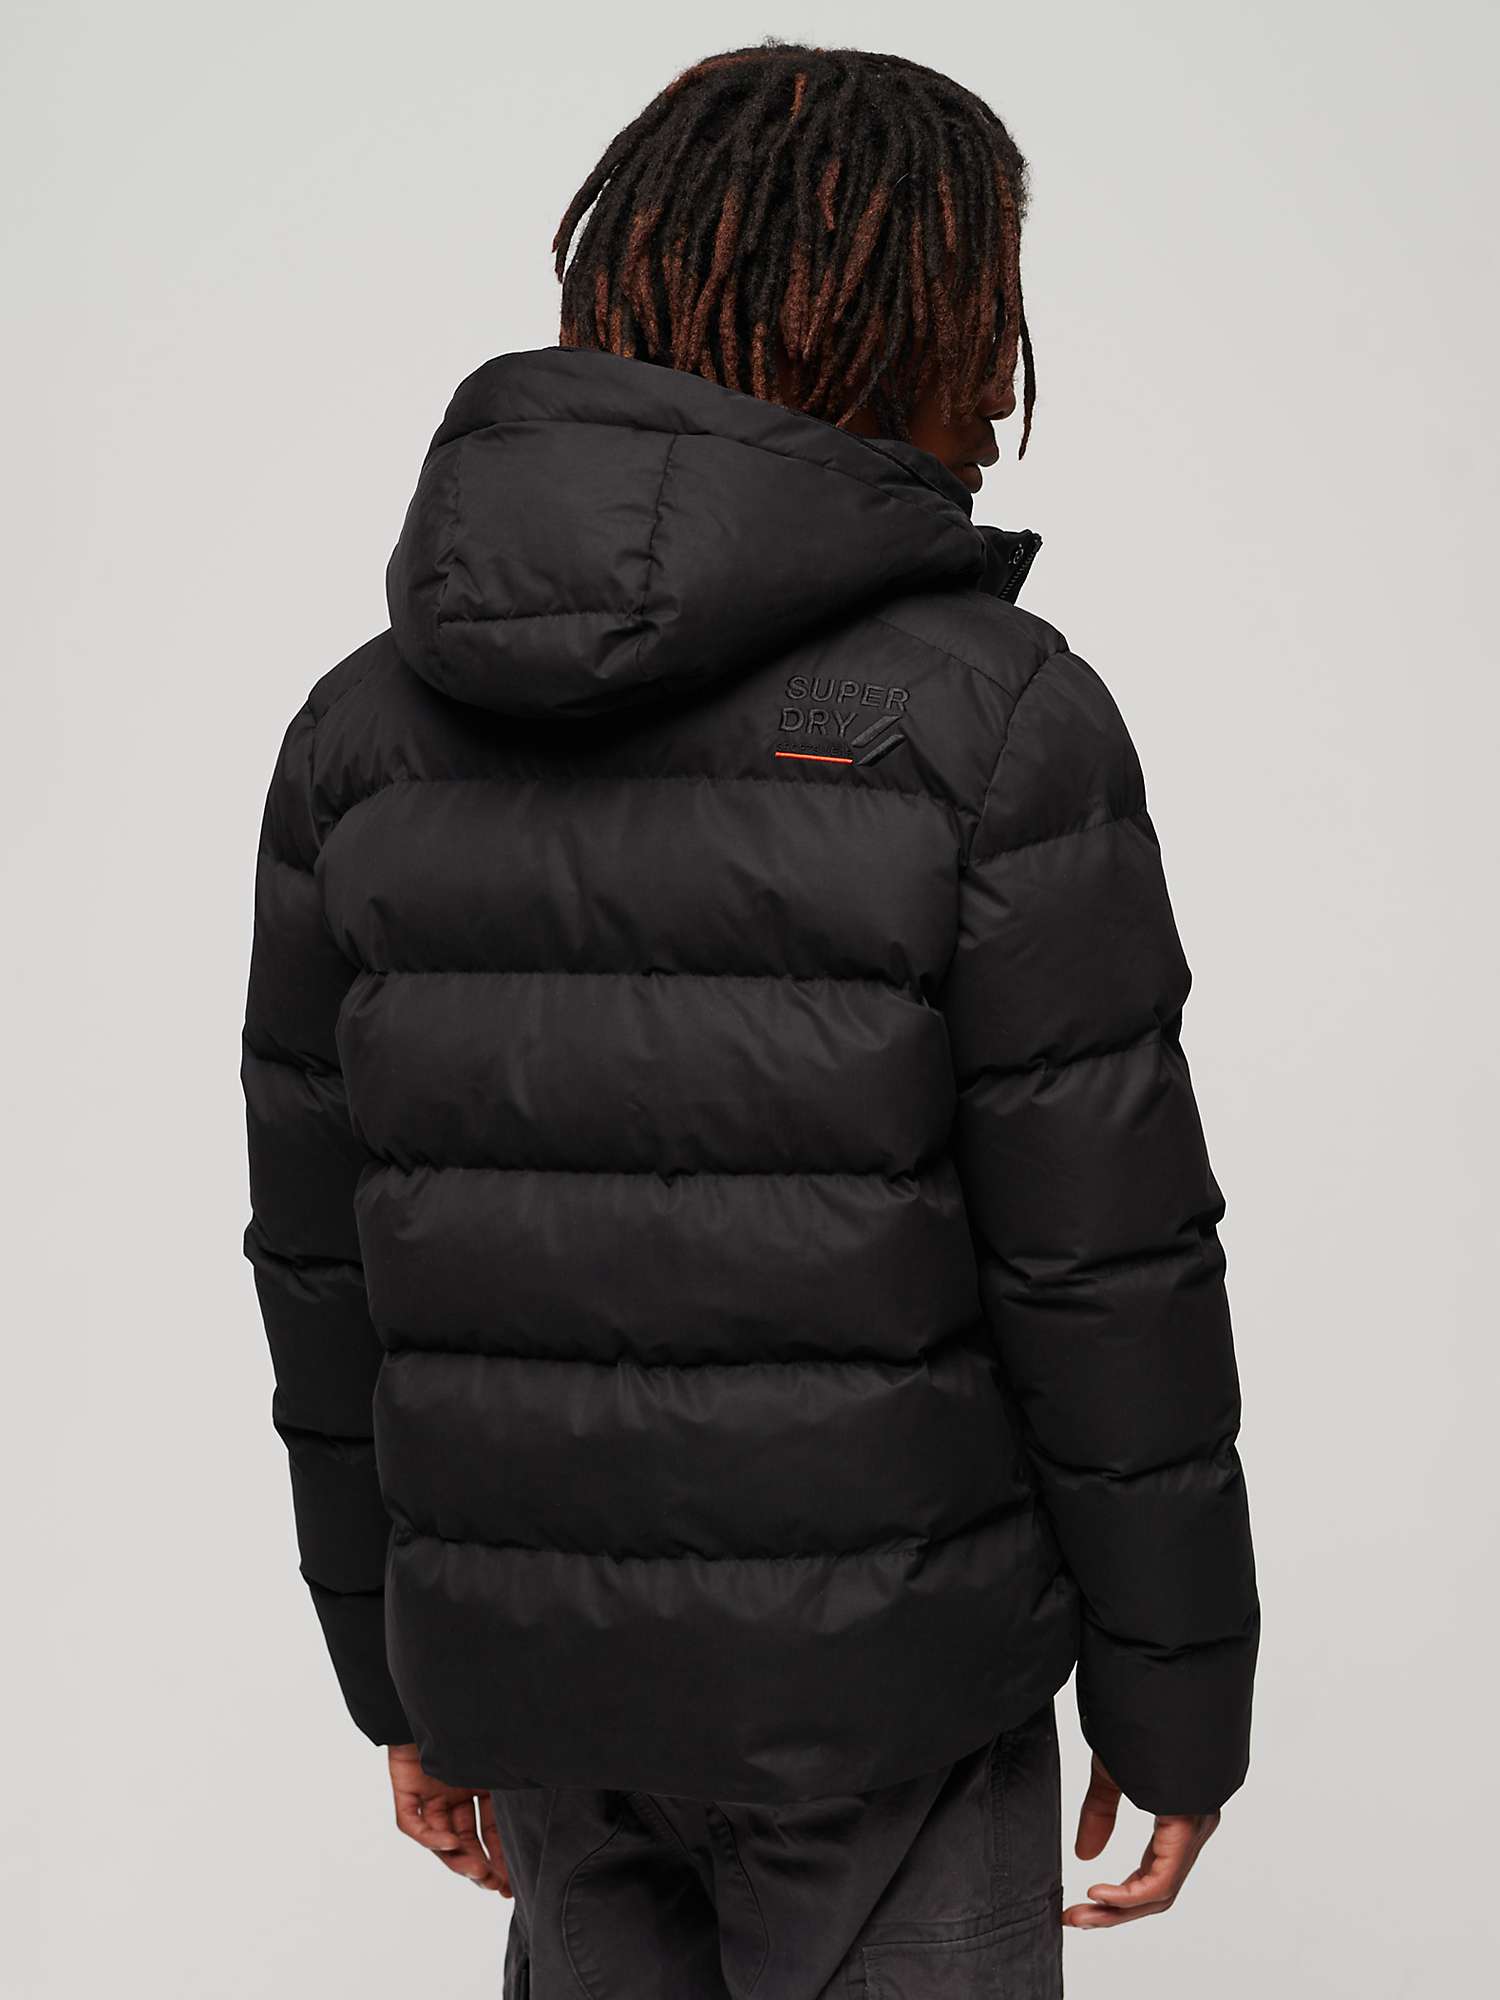 Jacket, Lewis Microfibre John Black Puffer Hooded Partners & at Superdry Sports